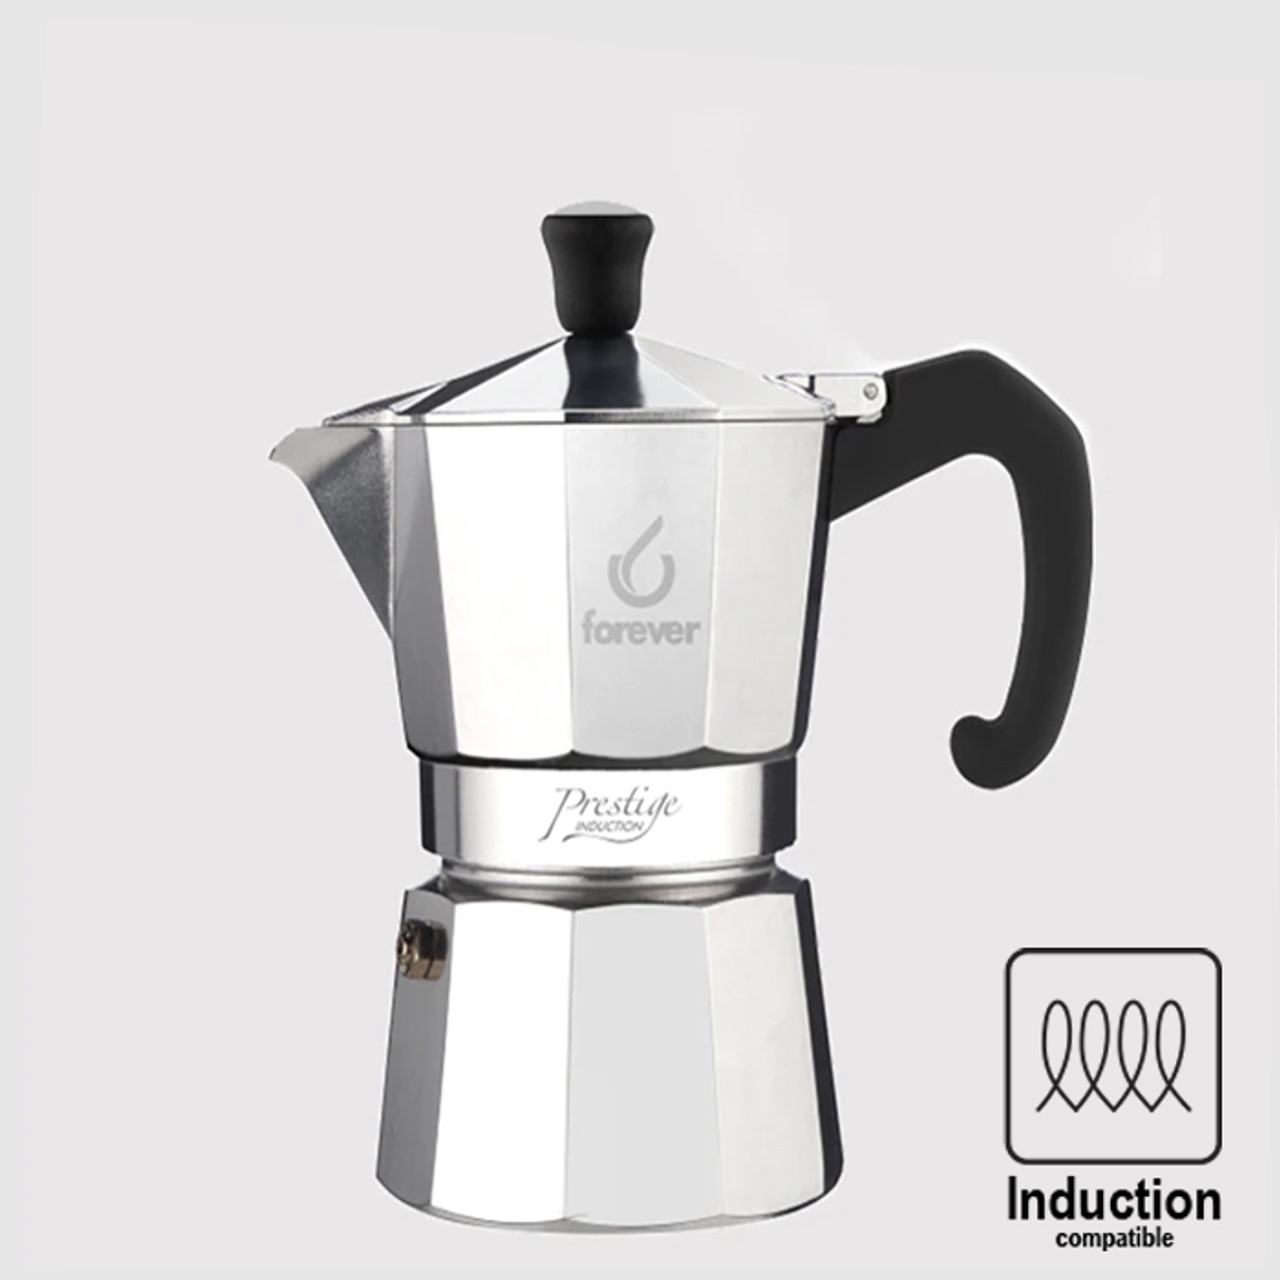 https://cdn11.bigcommerce.com/s-wq9vmkmoi6/images/stencil/1280x1280/products/773/3946/Forever_Moka_Prestige_Induction_6cups_wIcon-01__62131.1692017901.jpg?c=2